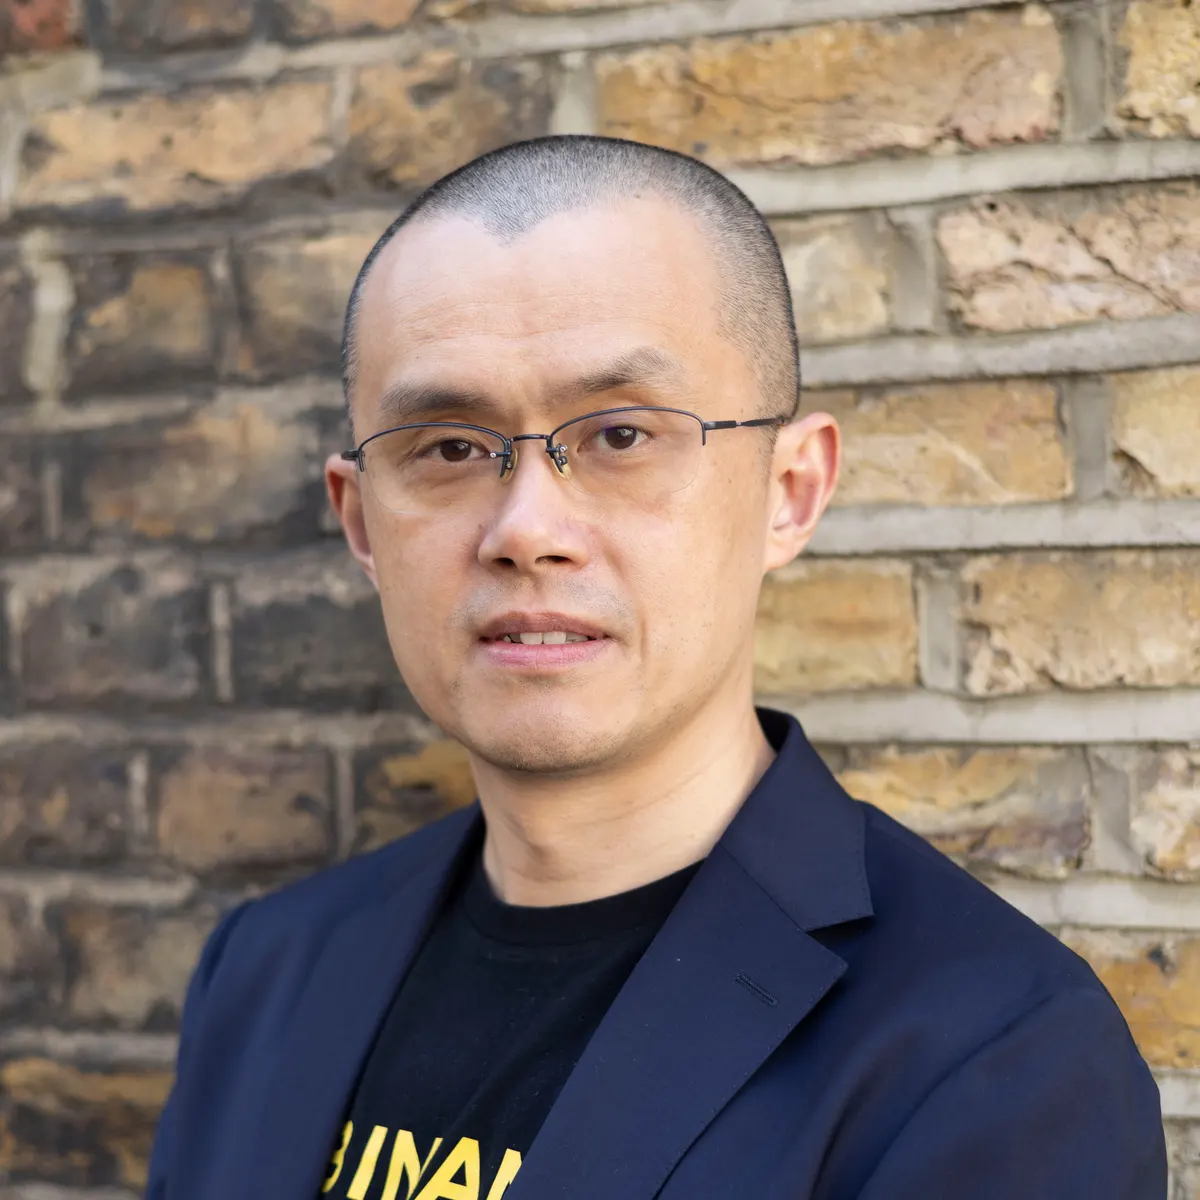 Cz-to-step-down,-binance-to-pay-$4.3b-in-a-settlement-with-doj:-reports